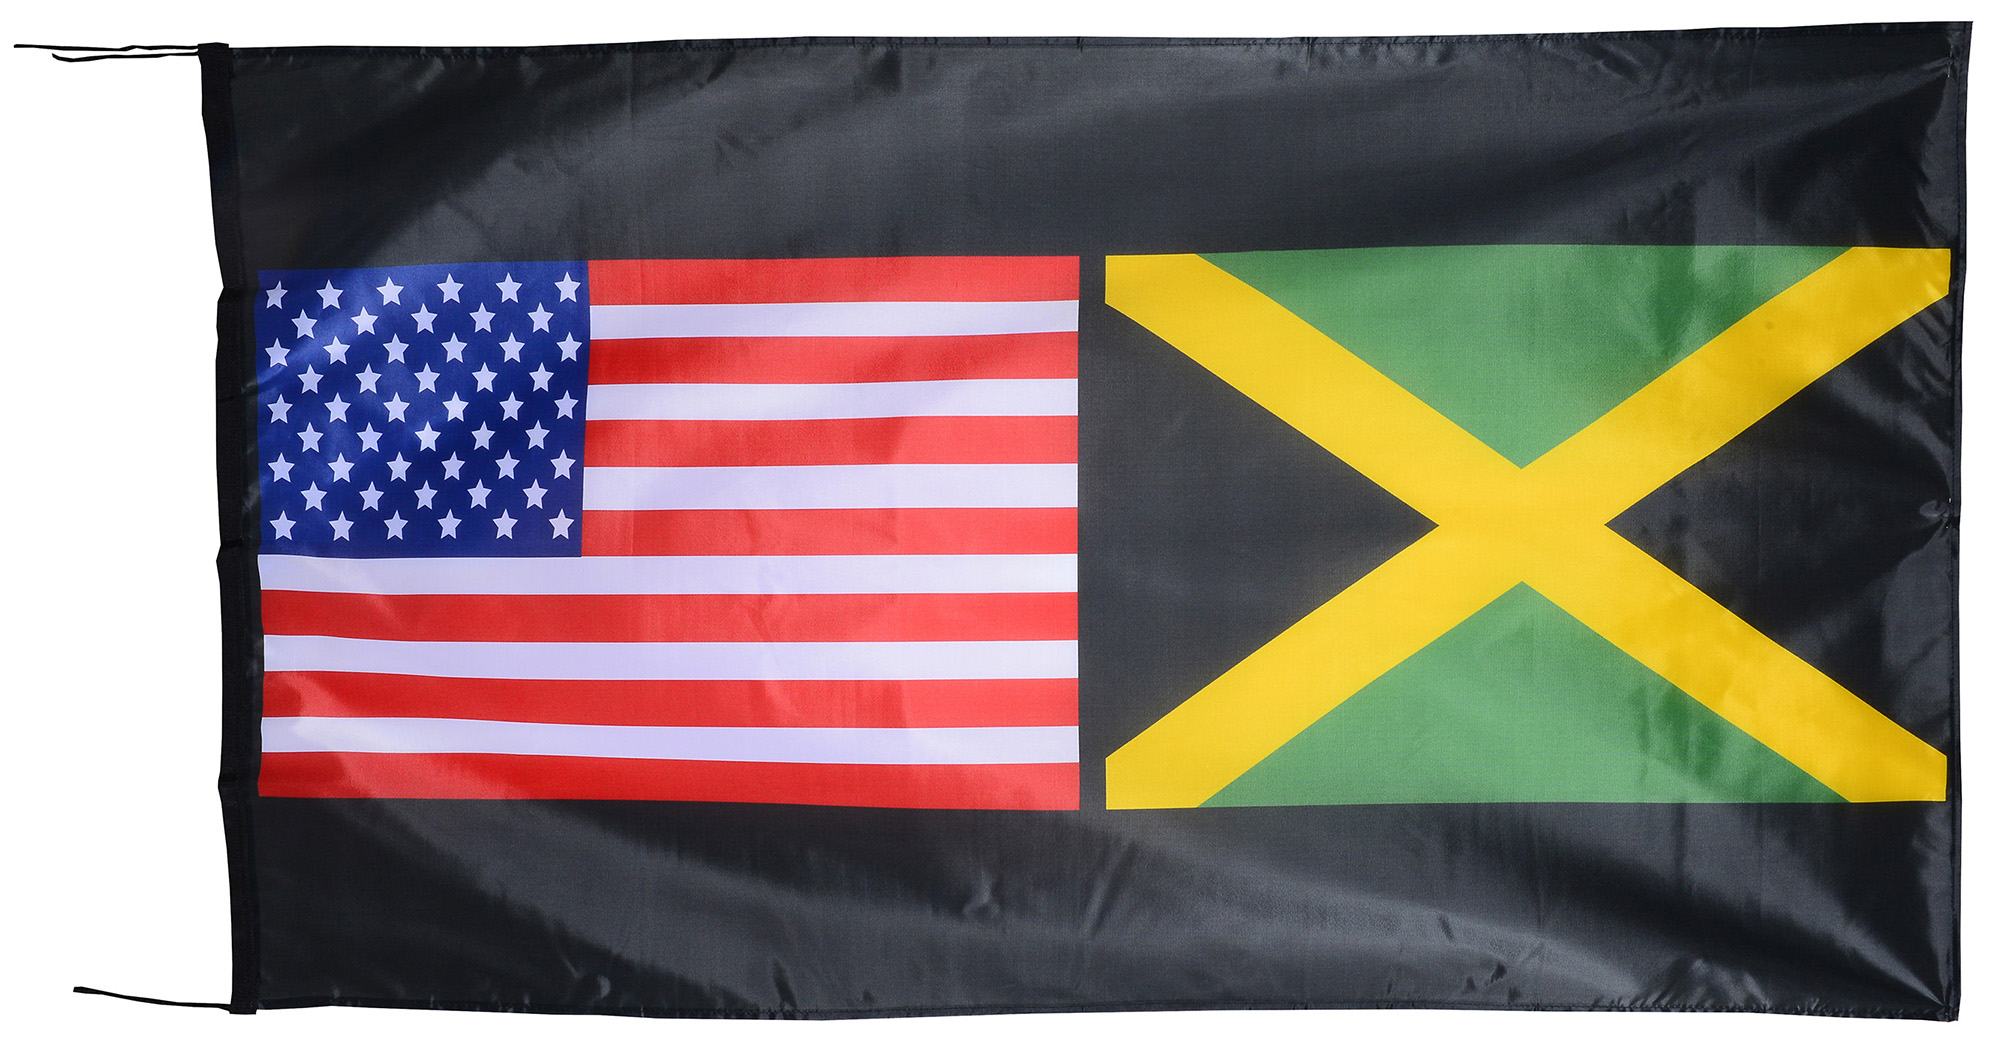 Flag  020 USA / US Country / United States Of America and Jamaica / American Patriotic / Pride Hybrid Weather-Resistant Polyester Outdoor Flag Landscape Banner / Vivid Colors / 3 X 5 FT (150 x 90cm) International Flags for Sale